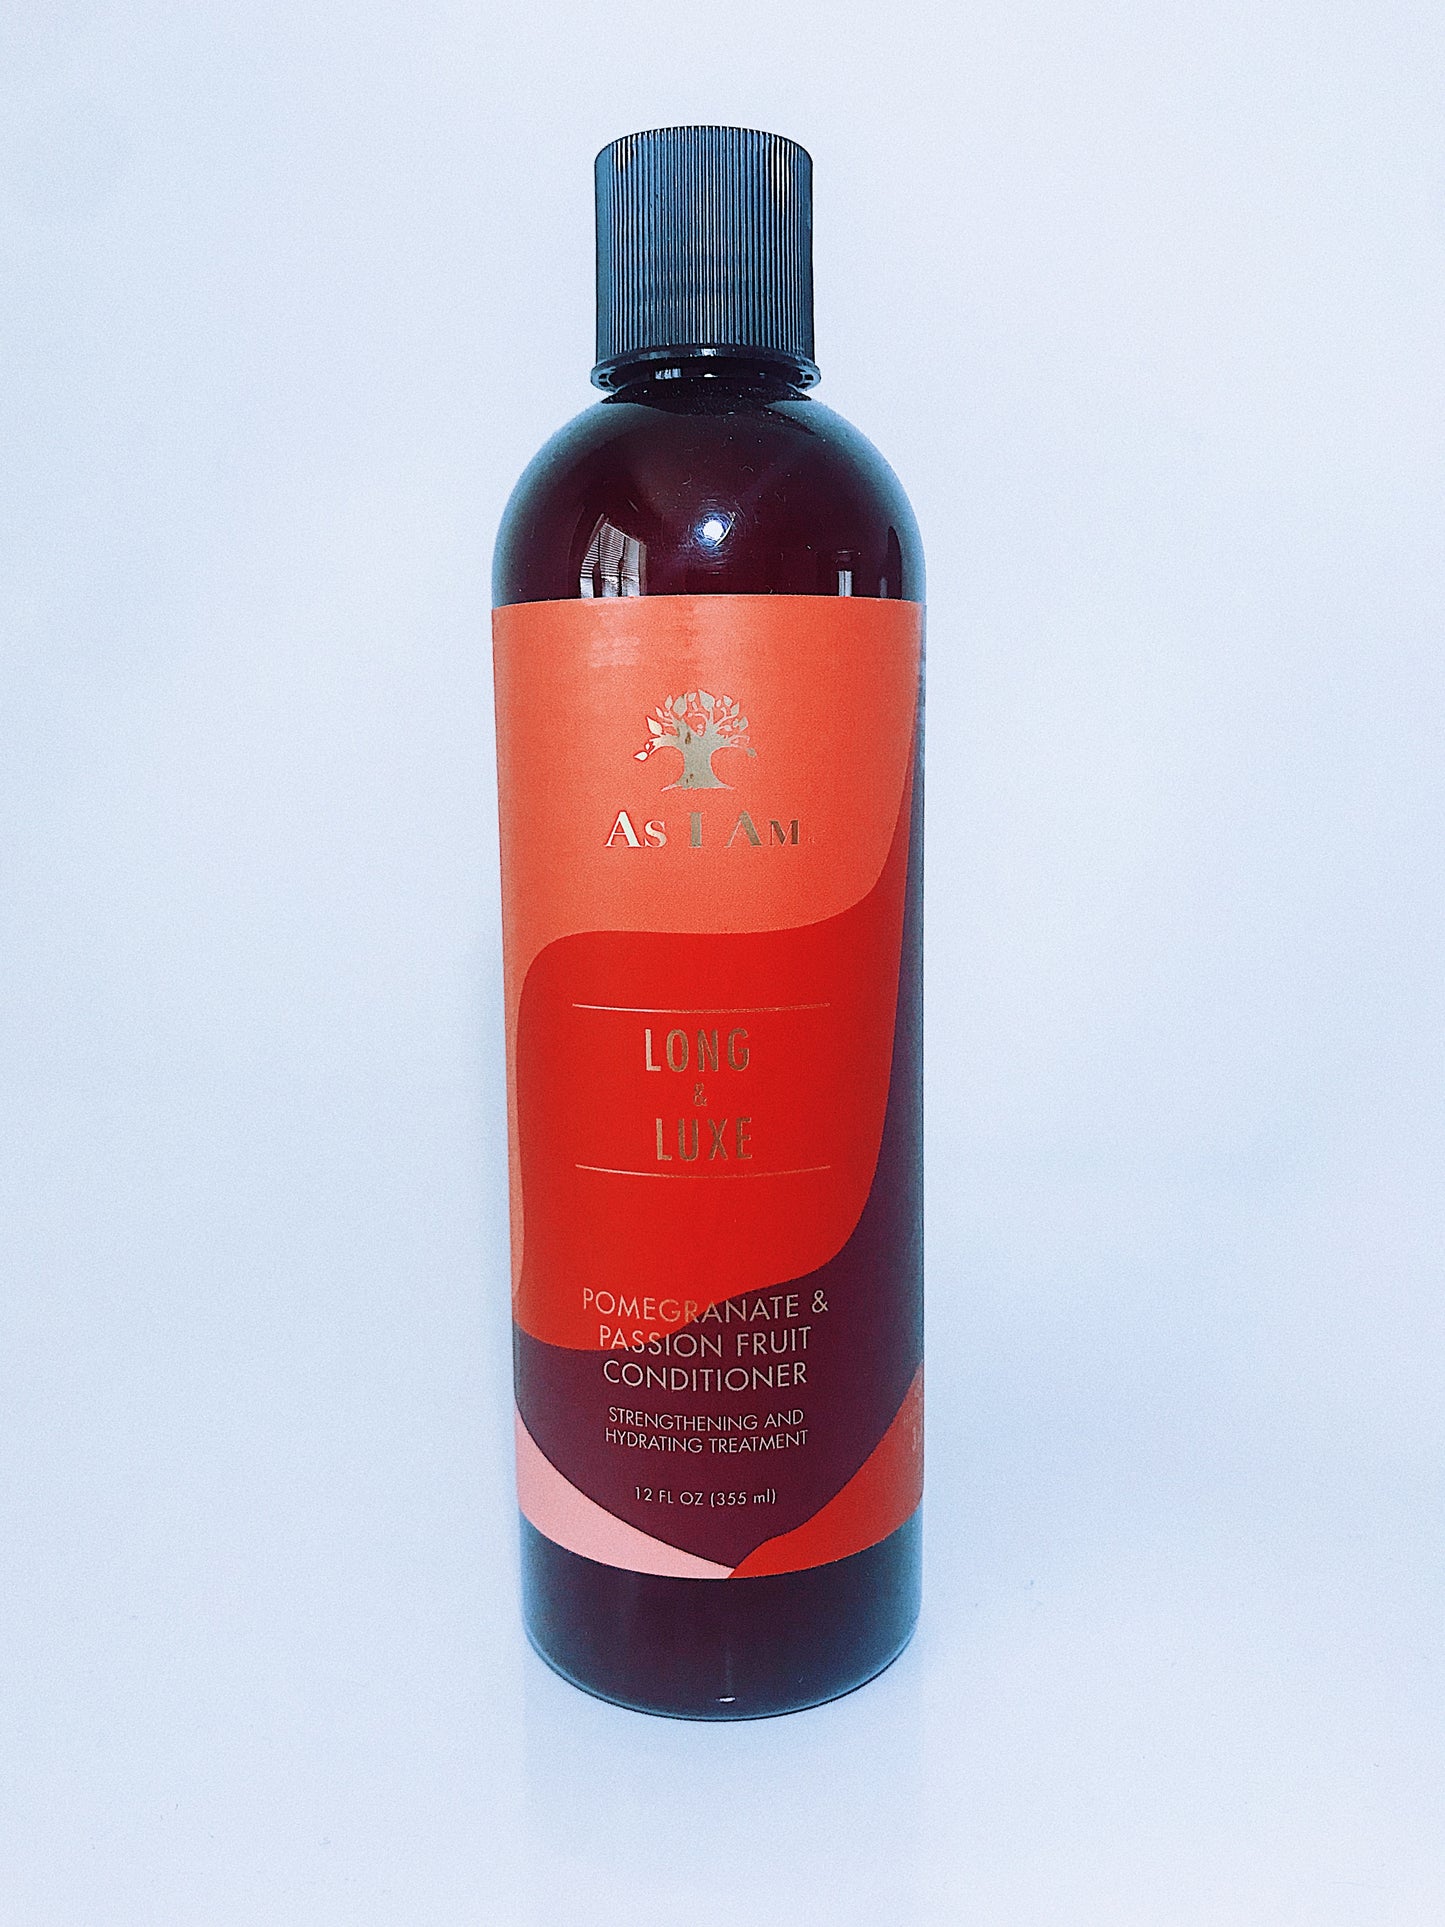 as-i-am-long-luxe-pomegranate-passion-fruit-conditioner.jpg